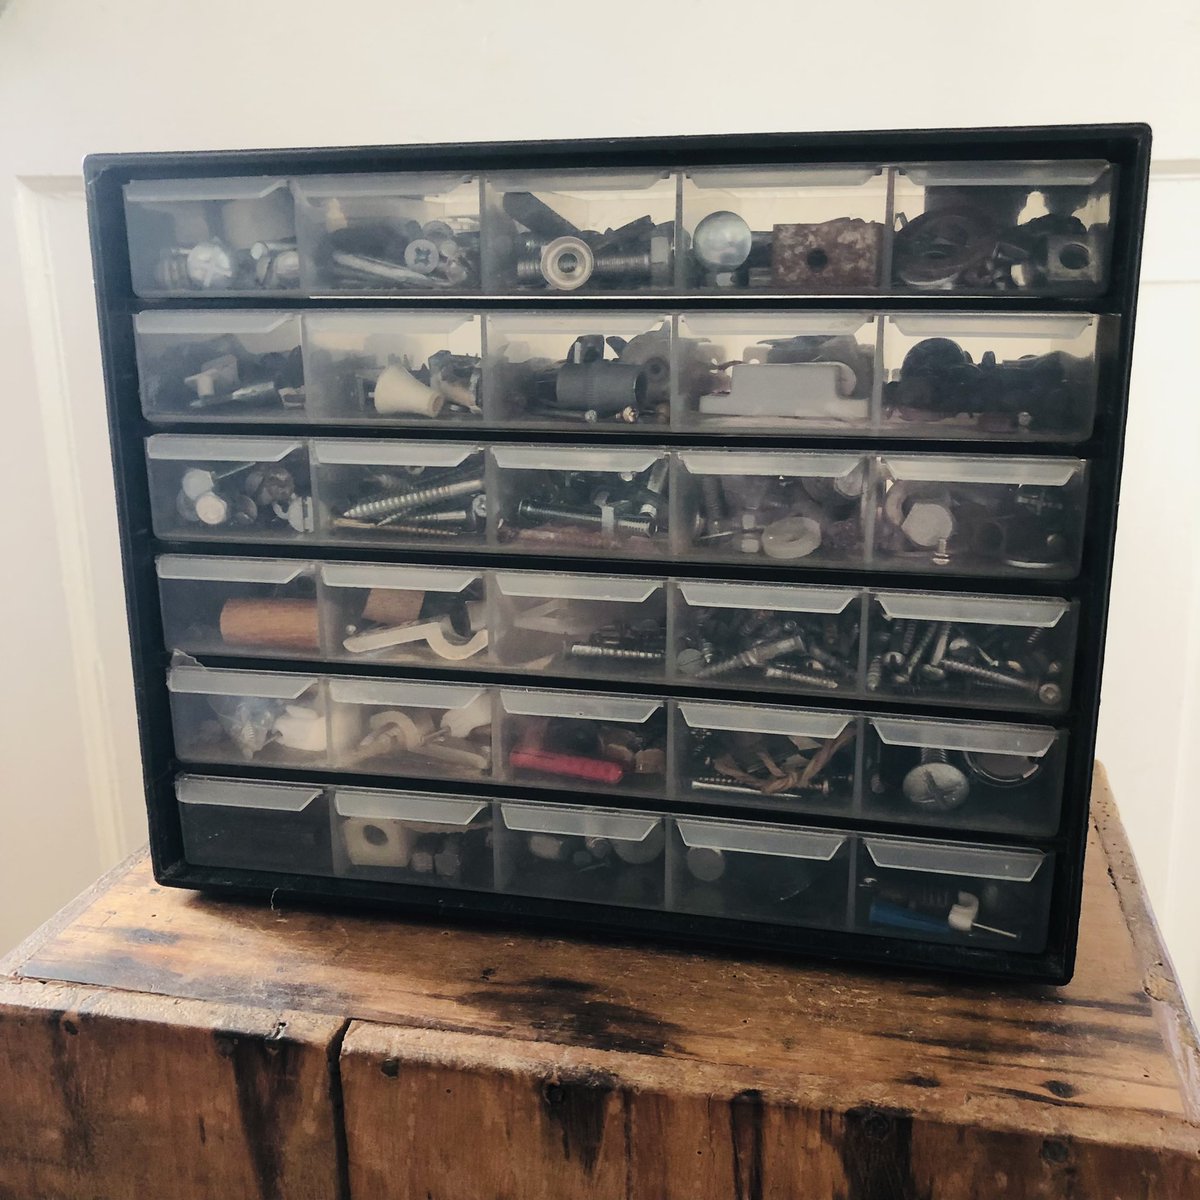 This was my Dad’s stash of odd screws, washers, hinges, hooks, lightpulls, latches and whatnots. I always find exactly the thing I need for the job. It’s 30 little compartments of conversation with him and to use it is a joy.